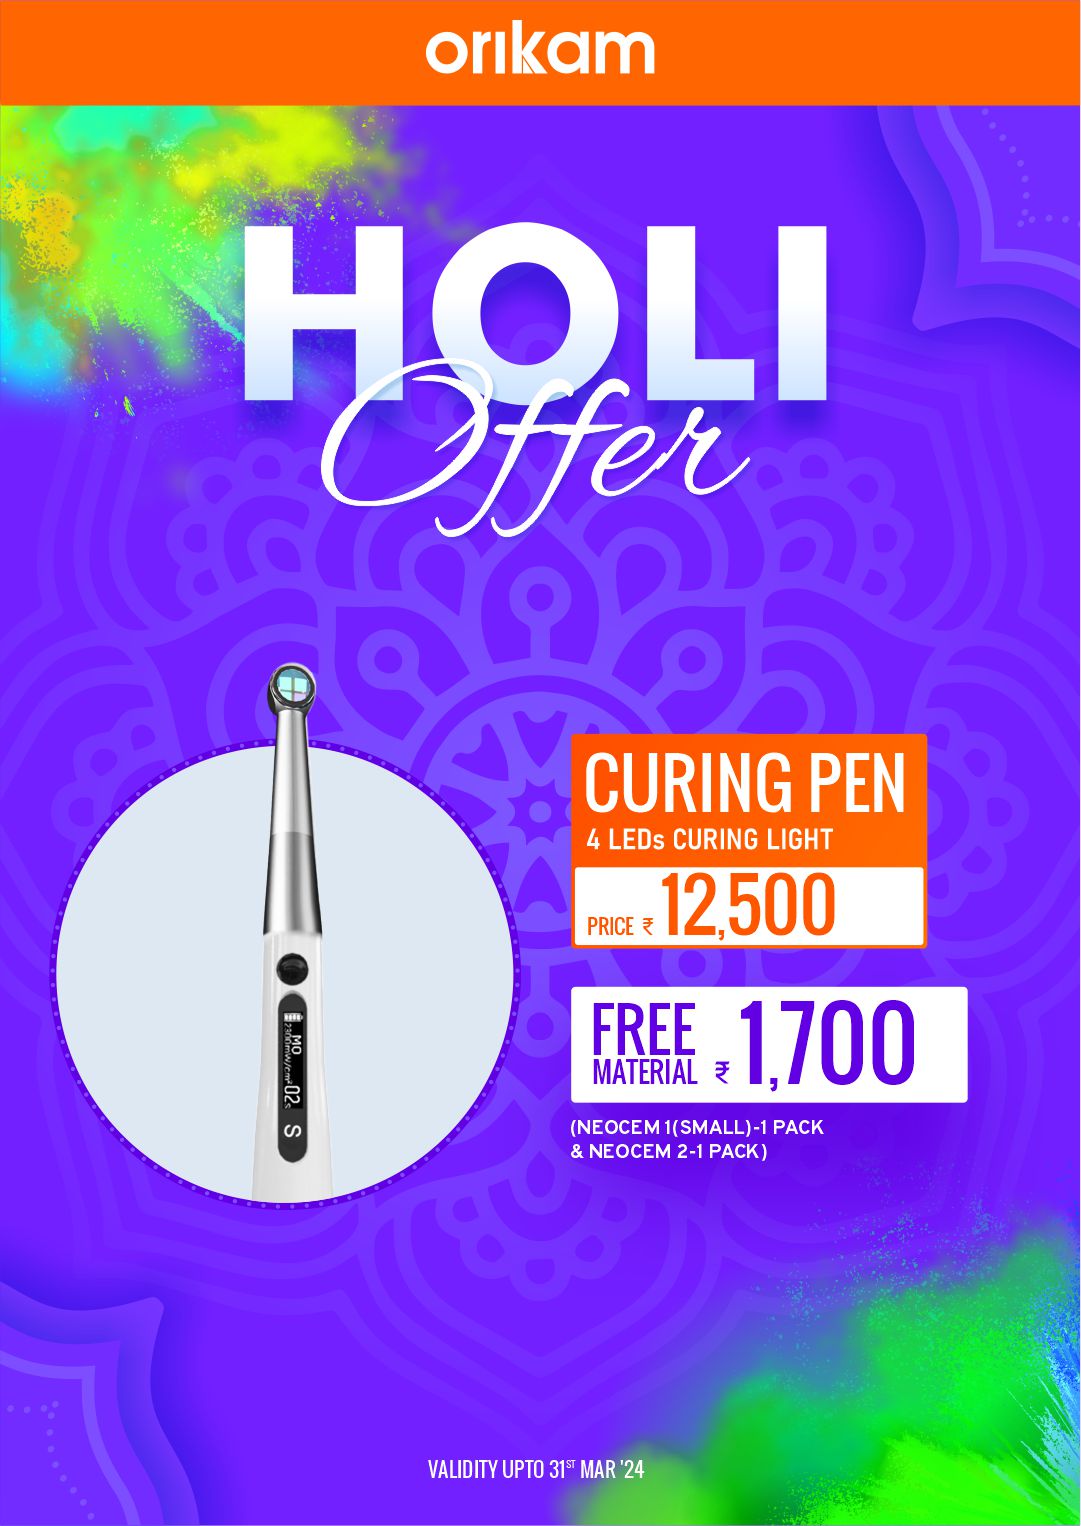 Curing Pen- 4 LEDs Curing Light